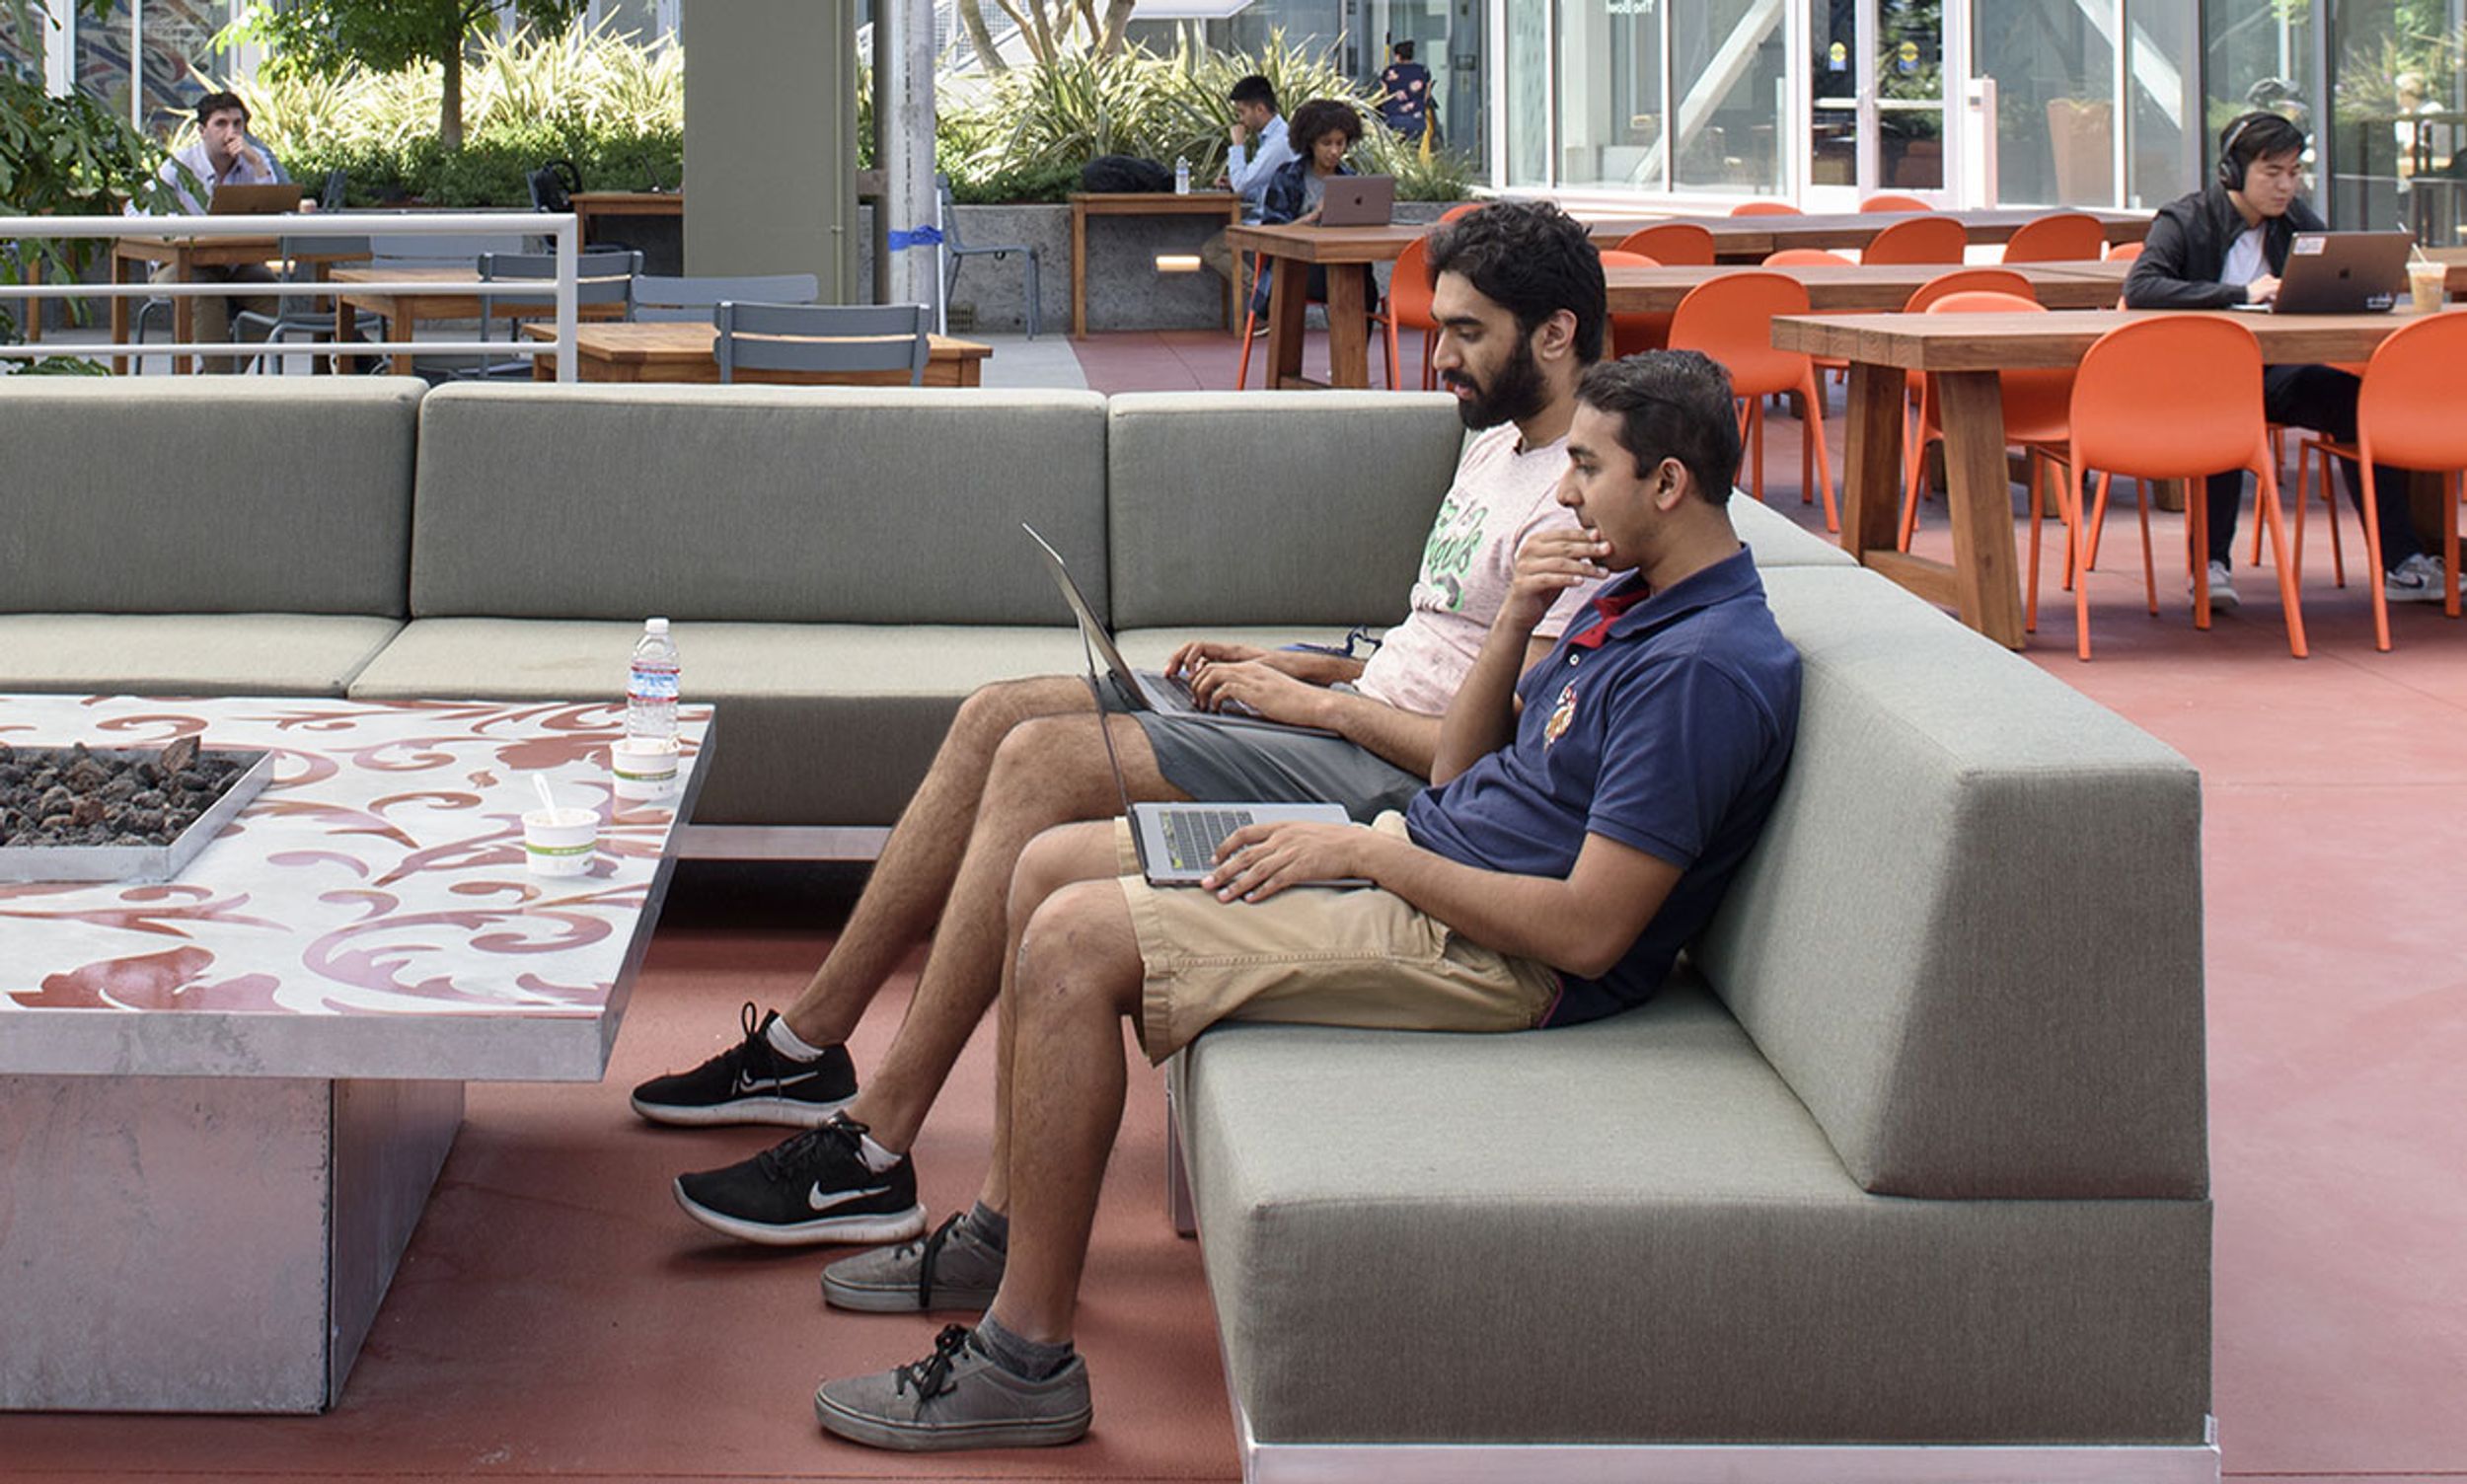 In this 2018 photo, Facebook employees work on laptop computers in an outdoor space at their MPK 21 office building in Menlo Park, California.